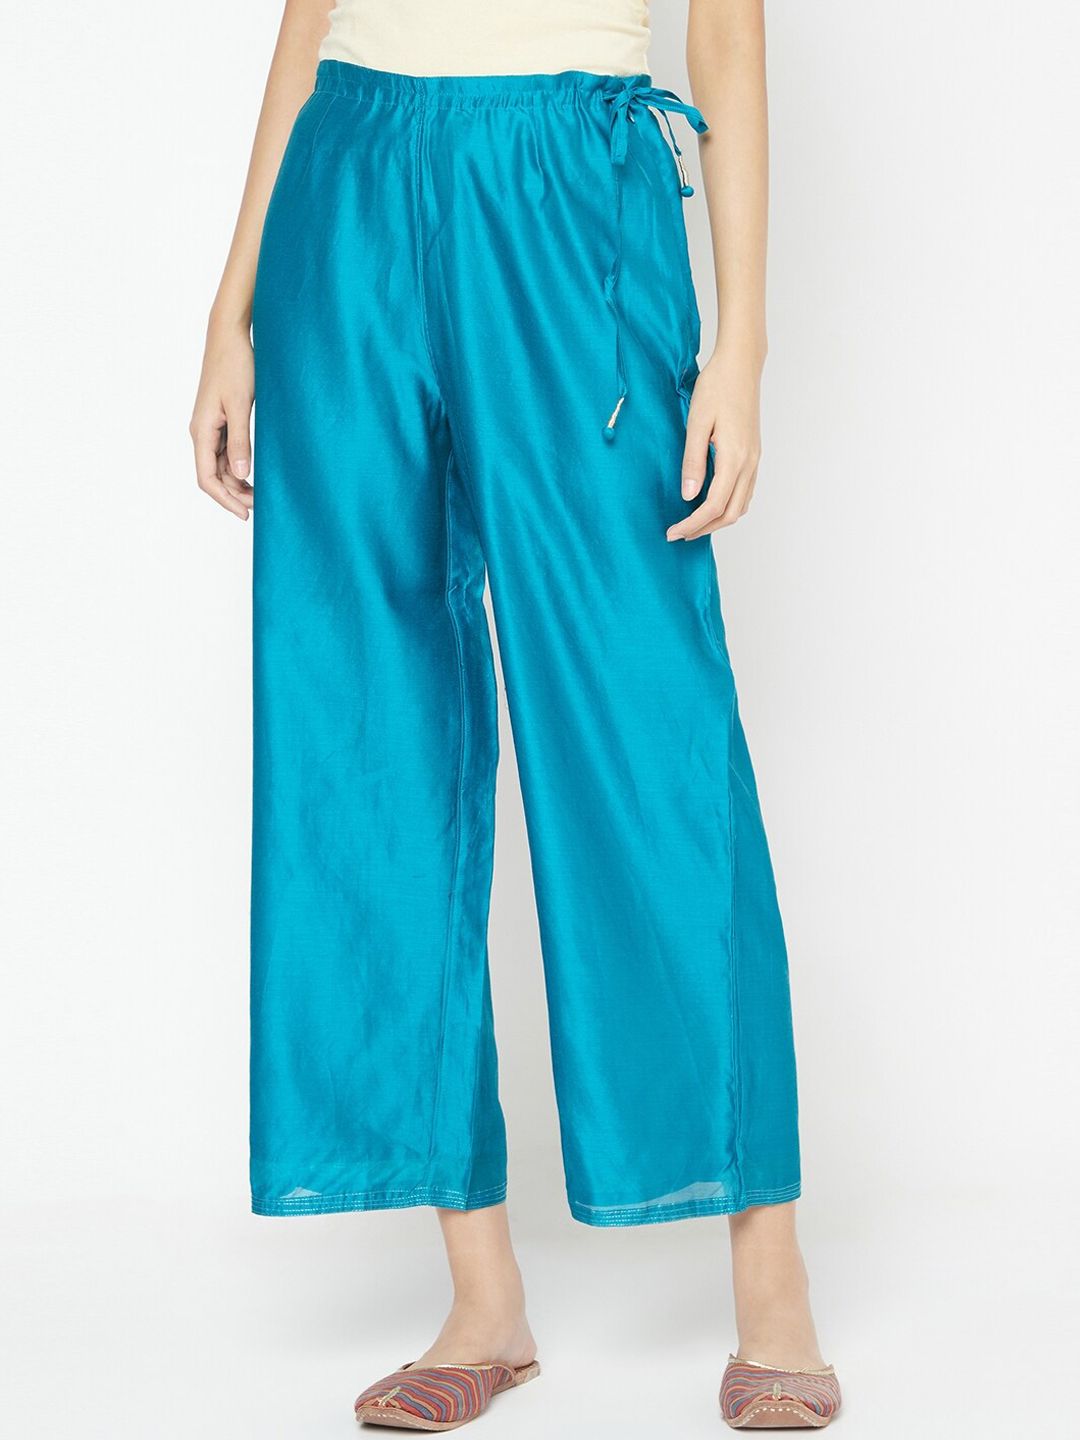 Fabindia Women Turquoise Blue Waist Tie Up Cotton Trousers Price in India